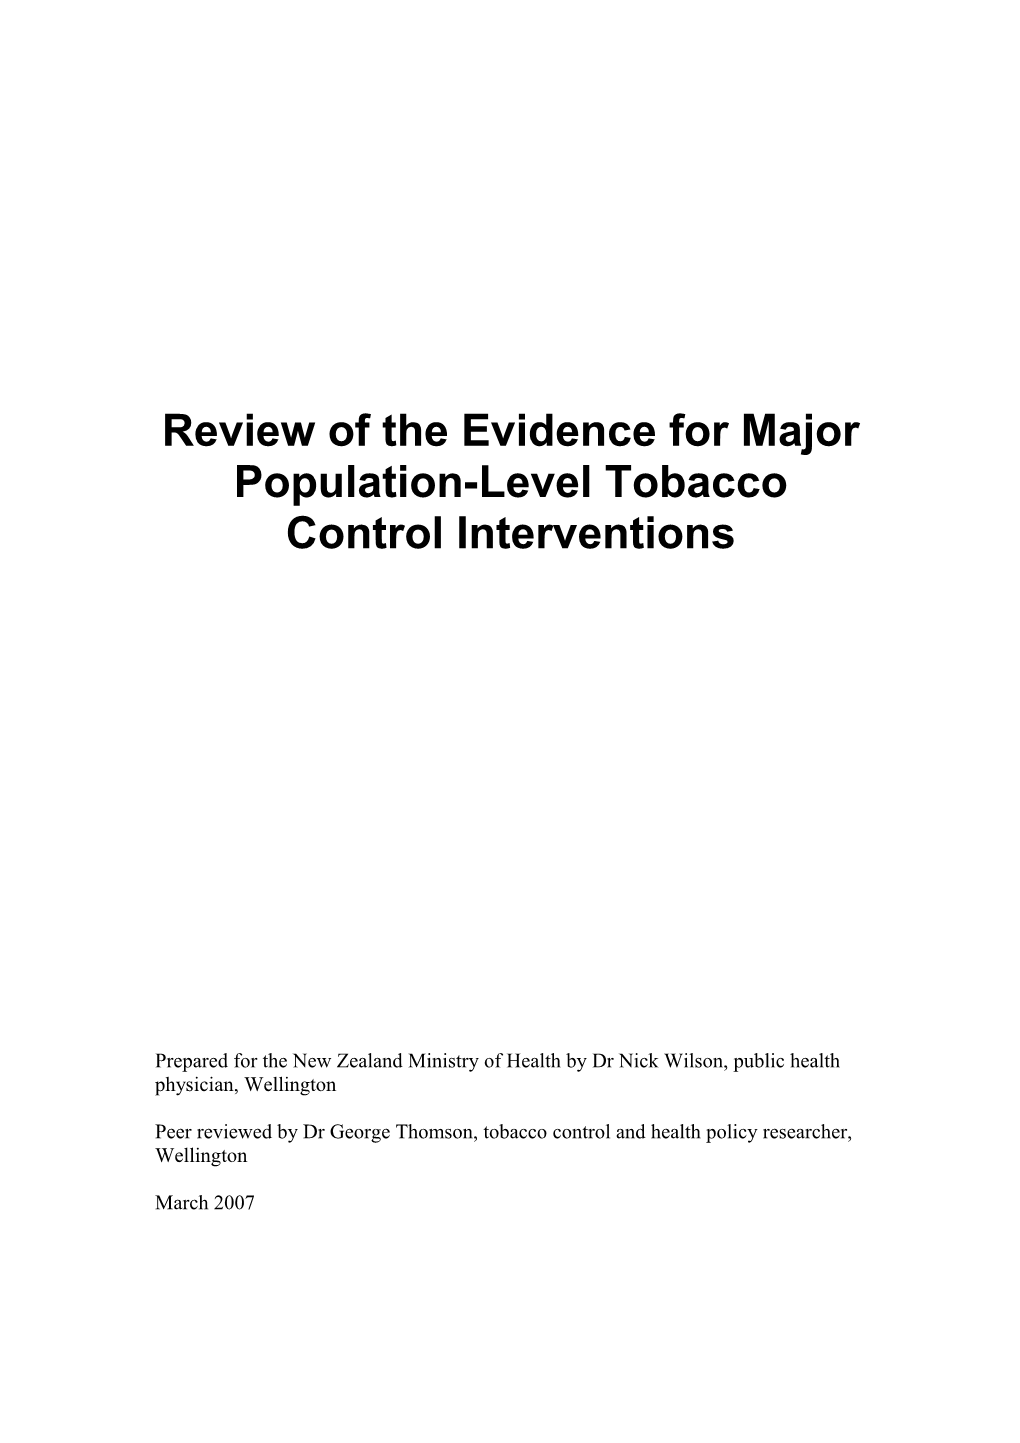 Review of the Evidence for Major Tobacco Control Interventions